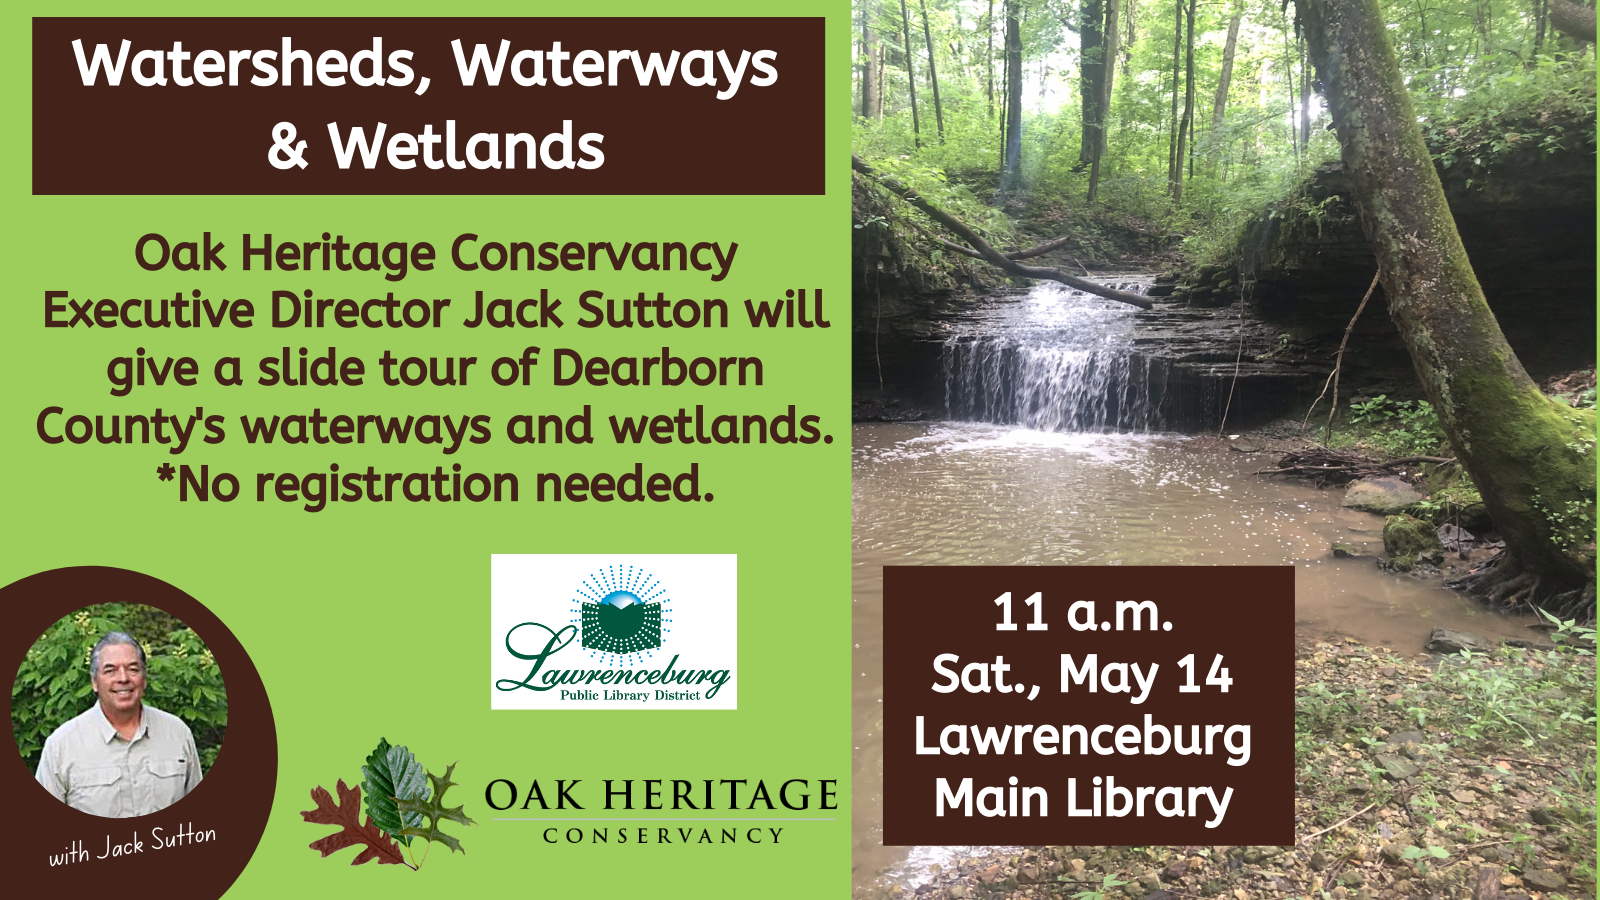 Watersheds, Waterways and Wetlands. 11 a.m. Saturday, May 14, Lawrenceburg Main Library. 